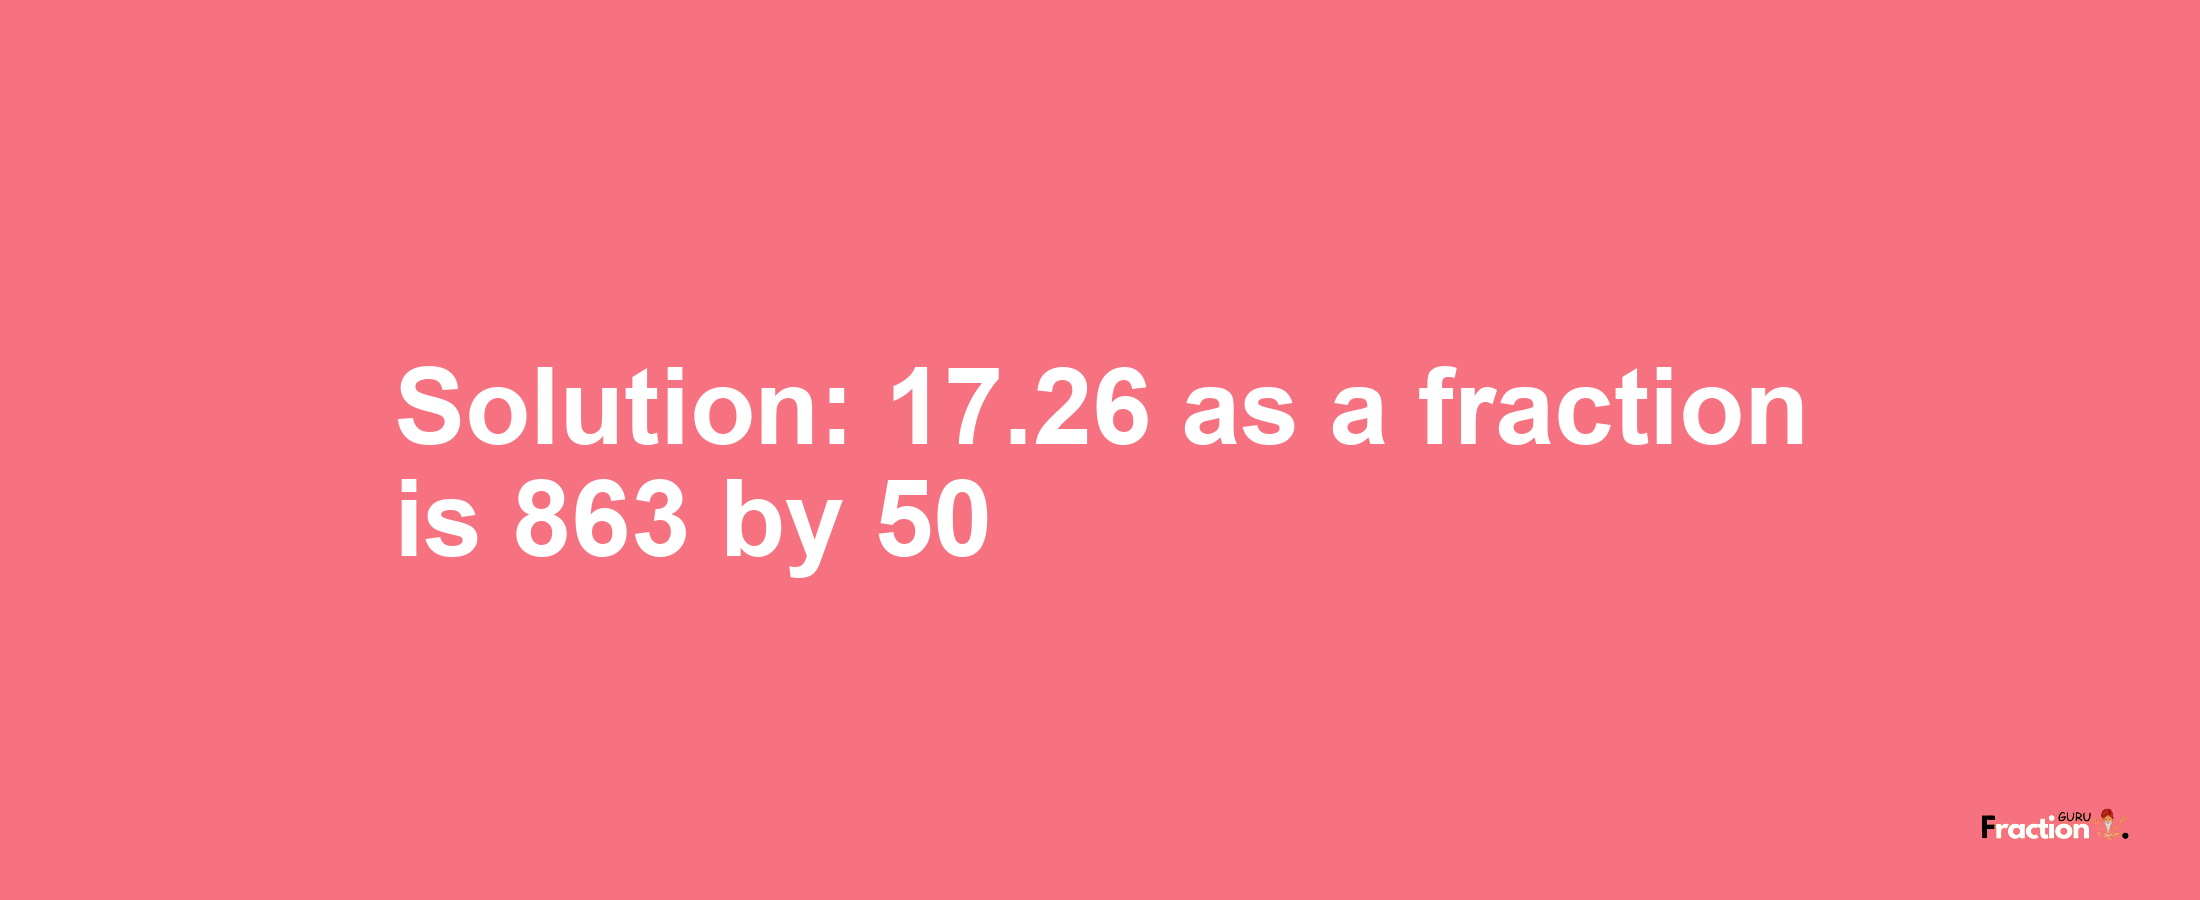 Solution:17.26 as a fraction is 863/50